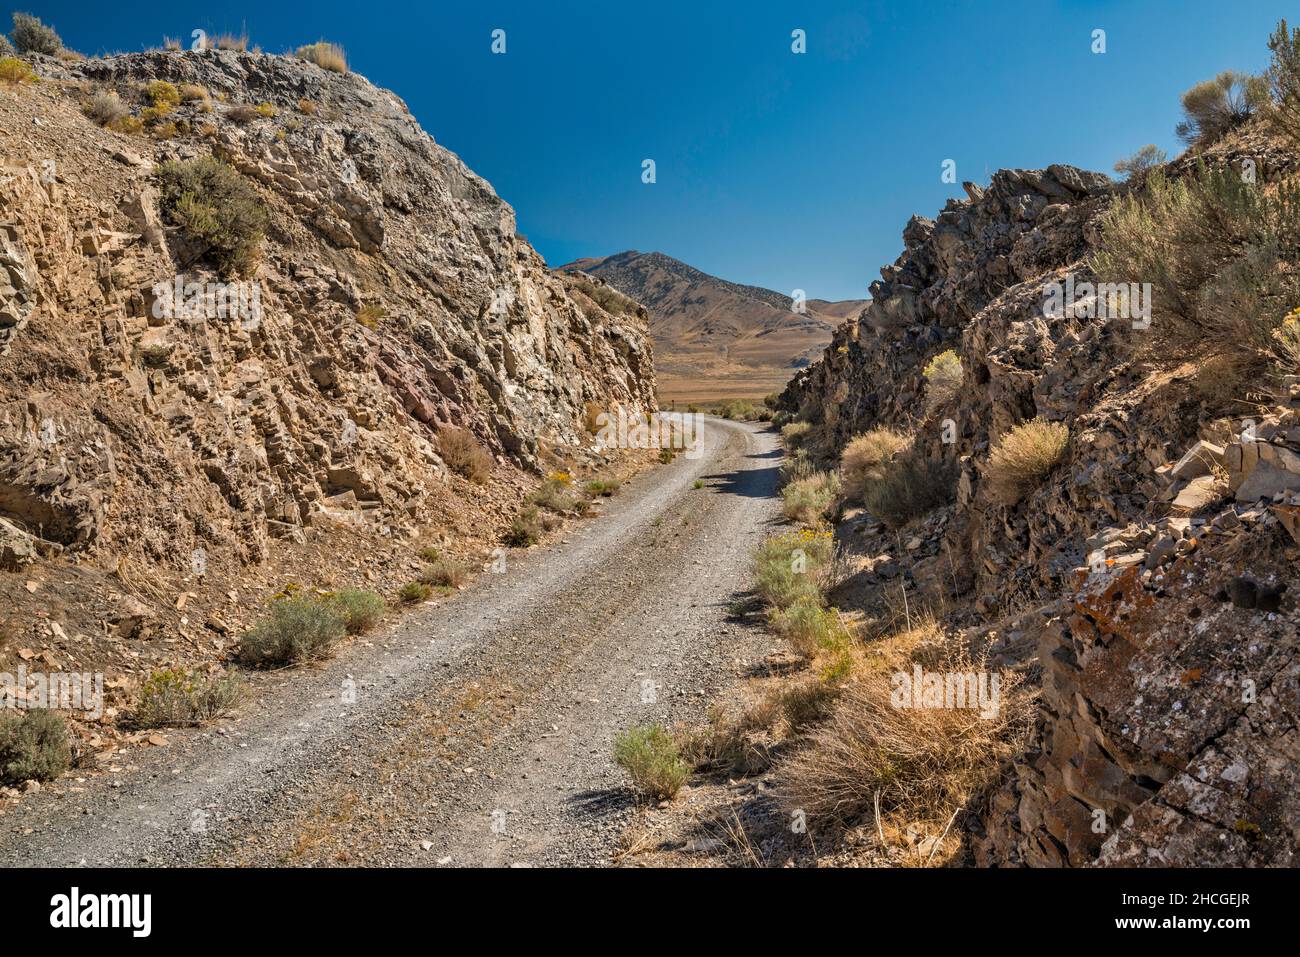 Transcontinental Railroad Byway, Central Pacific Railroad Grade, North Promontory Mountains in der Ferne, Golden Spike National Historical Park, Utah Stockfoto